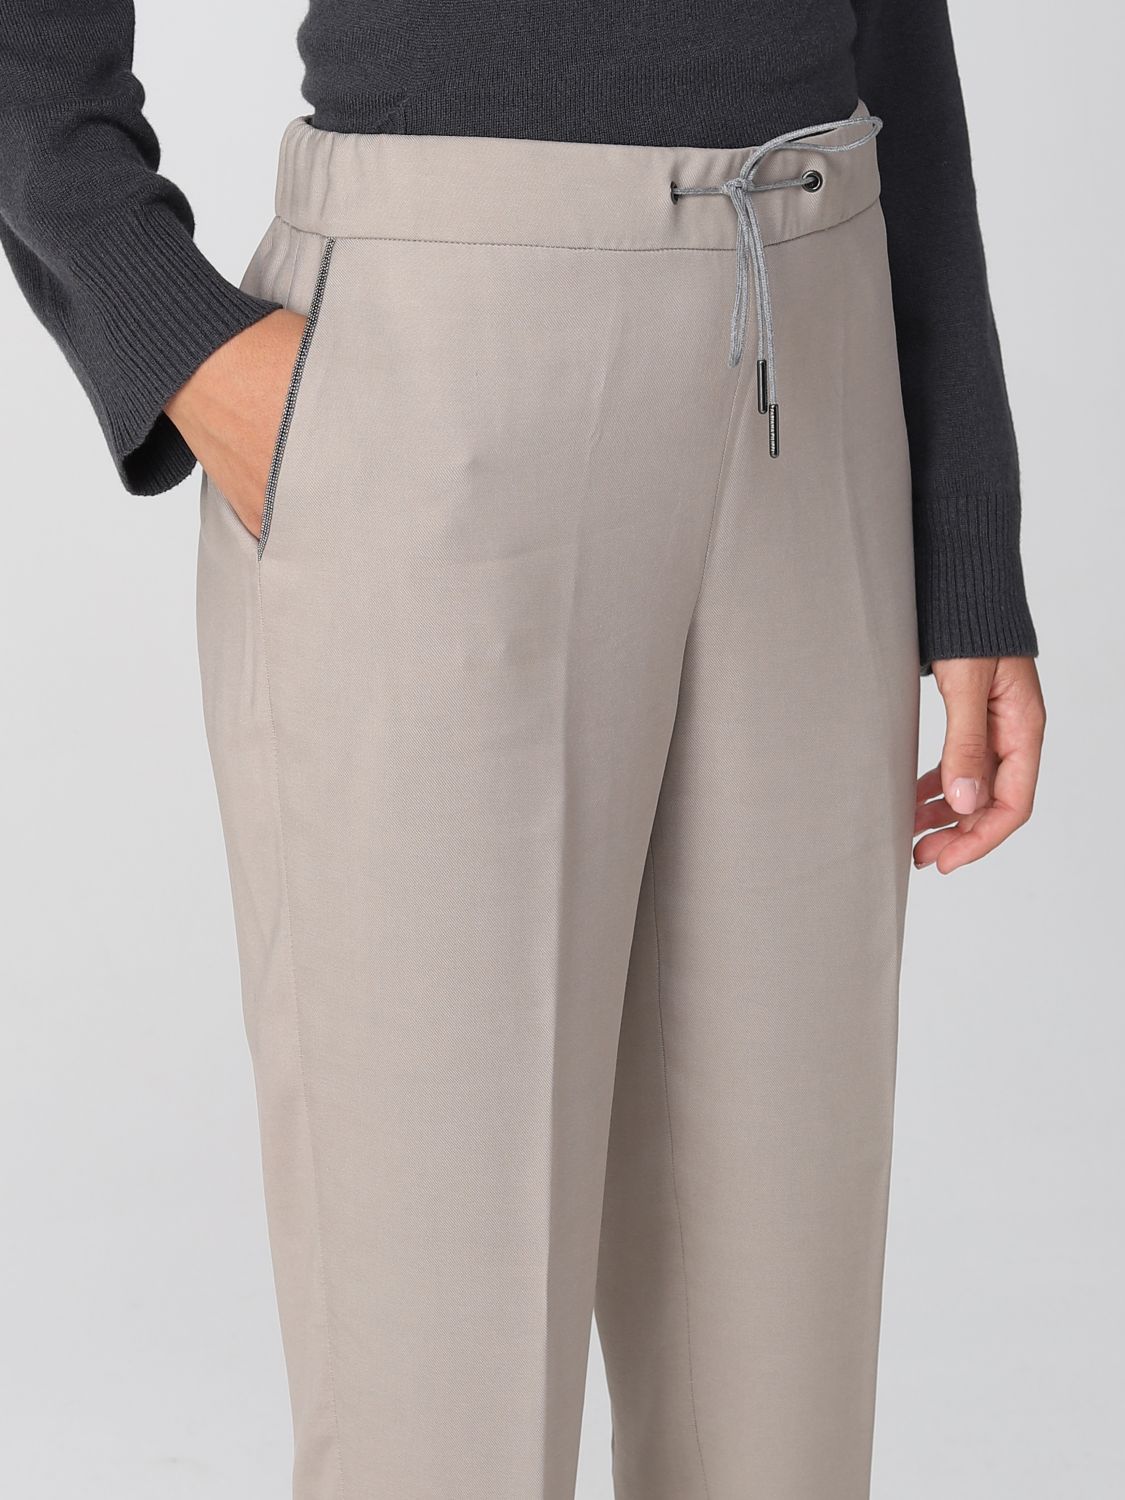 Pantalon Fabiana Filippi: Pantalon Fabiana Filippi femme taupe 3